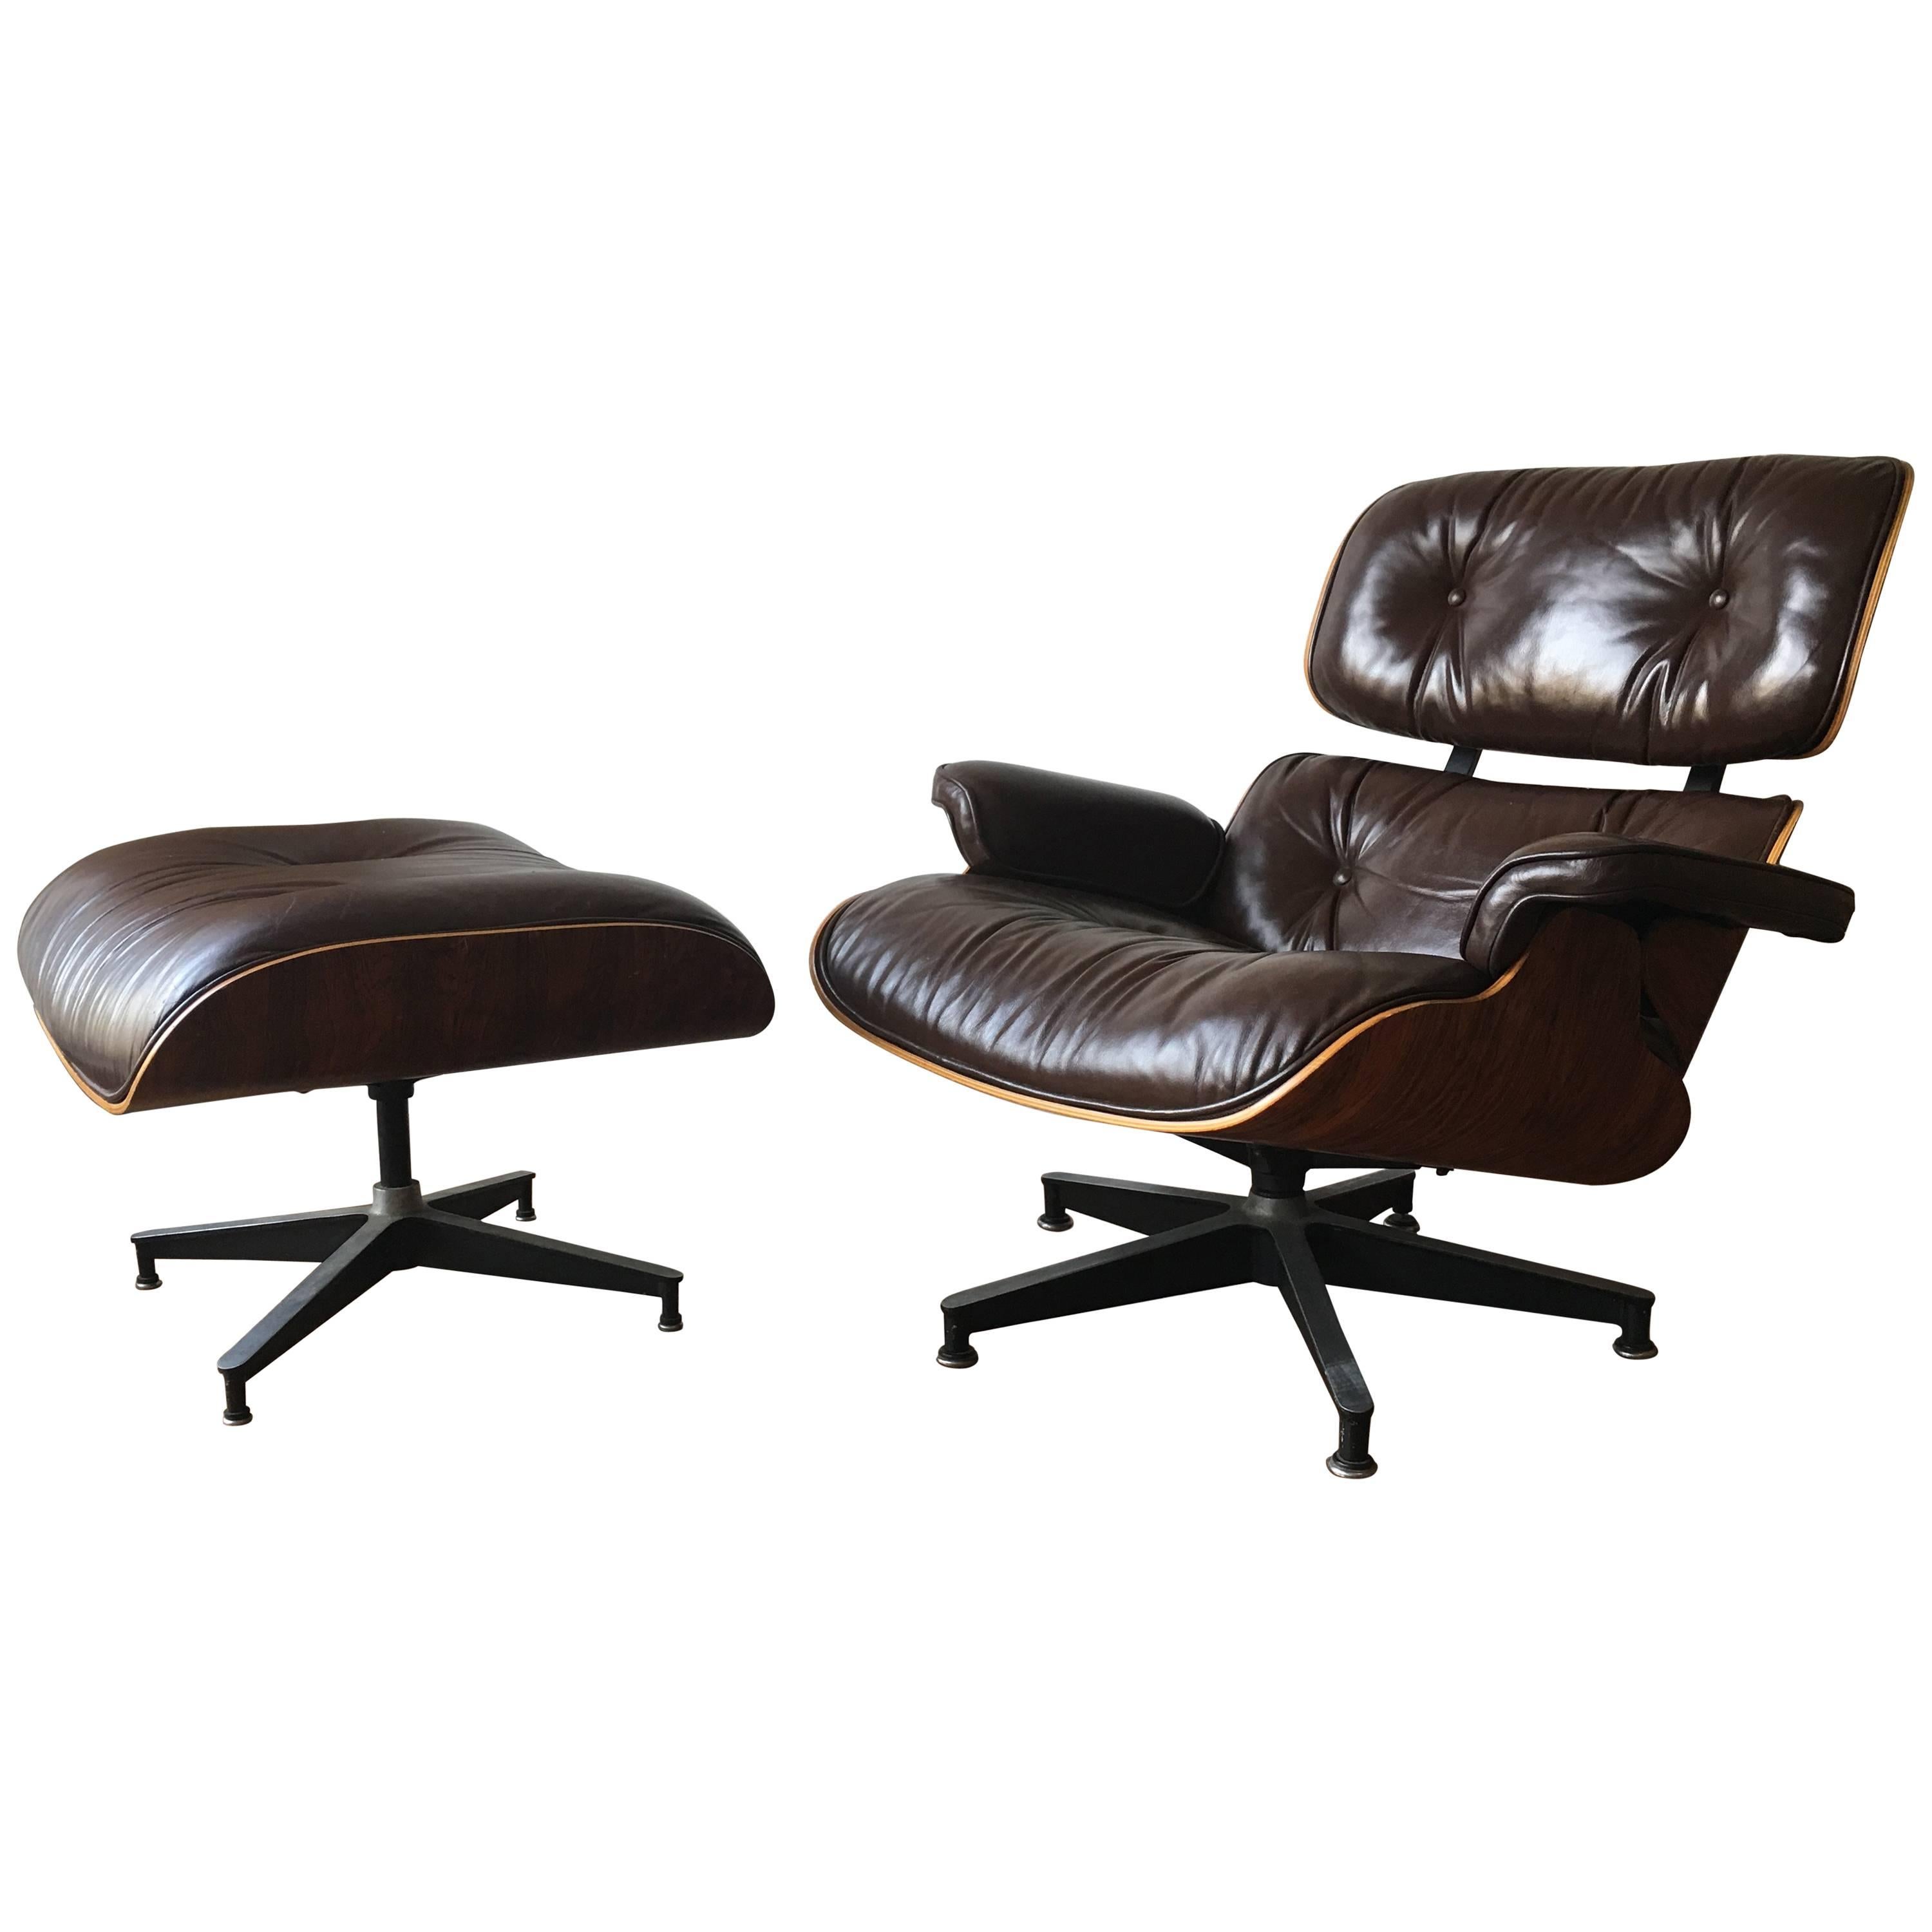 Vintage Herman Miller Eames lounge and ottoman with brown leather. 9.9/10 condition. Absolutely superb and all original.